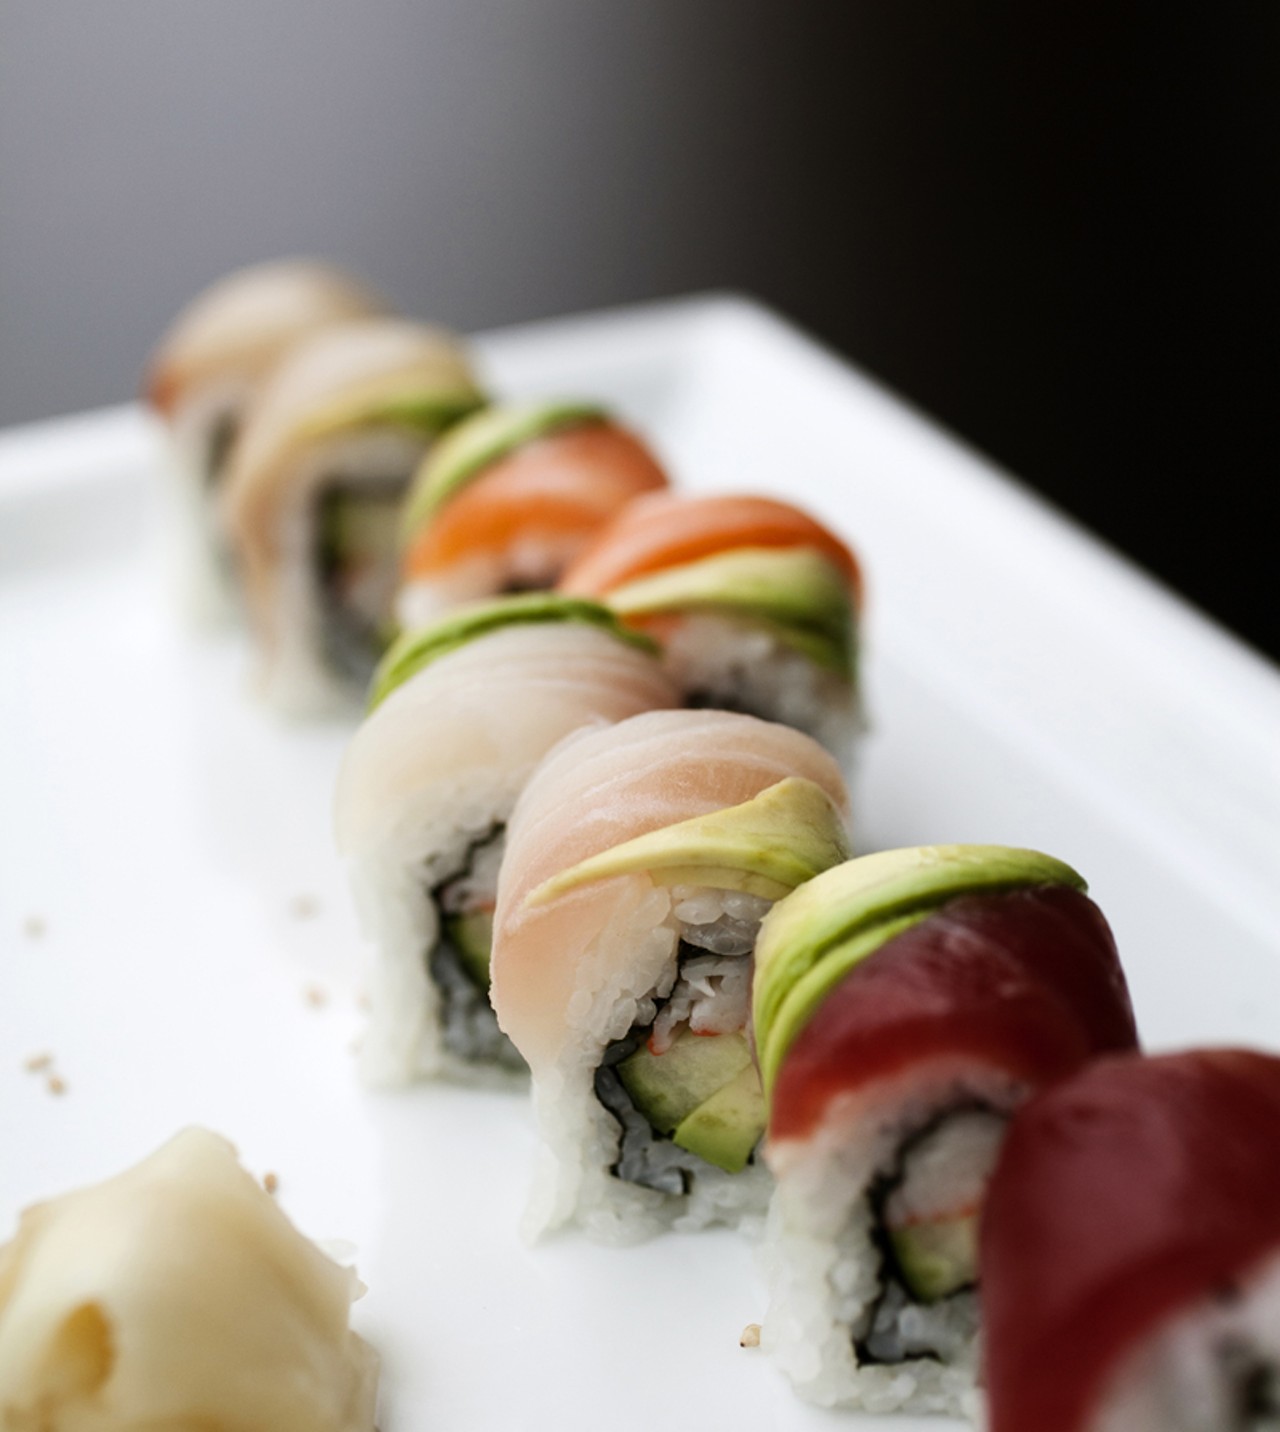 Rainbow roll is crab stick with cucumber topped with four kinds of fish and avocado.